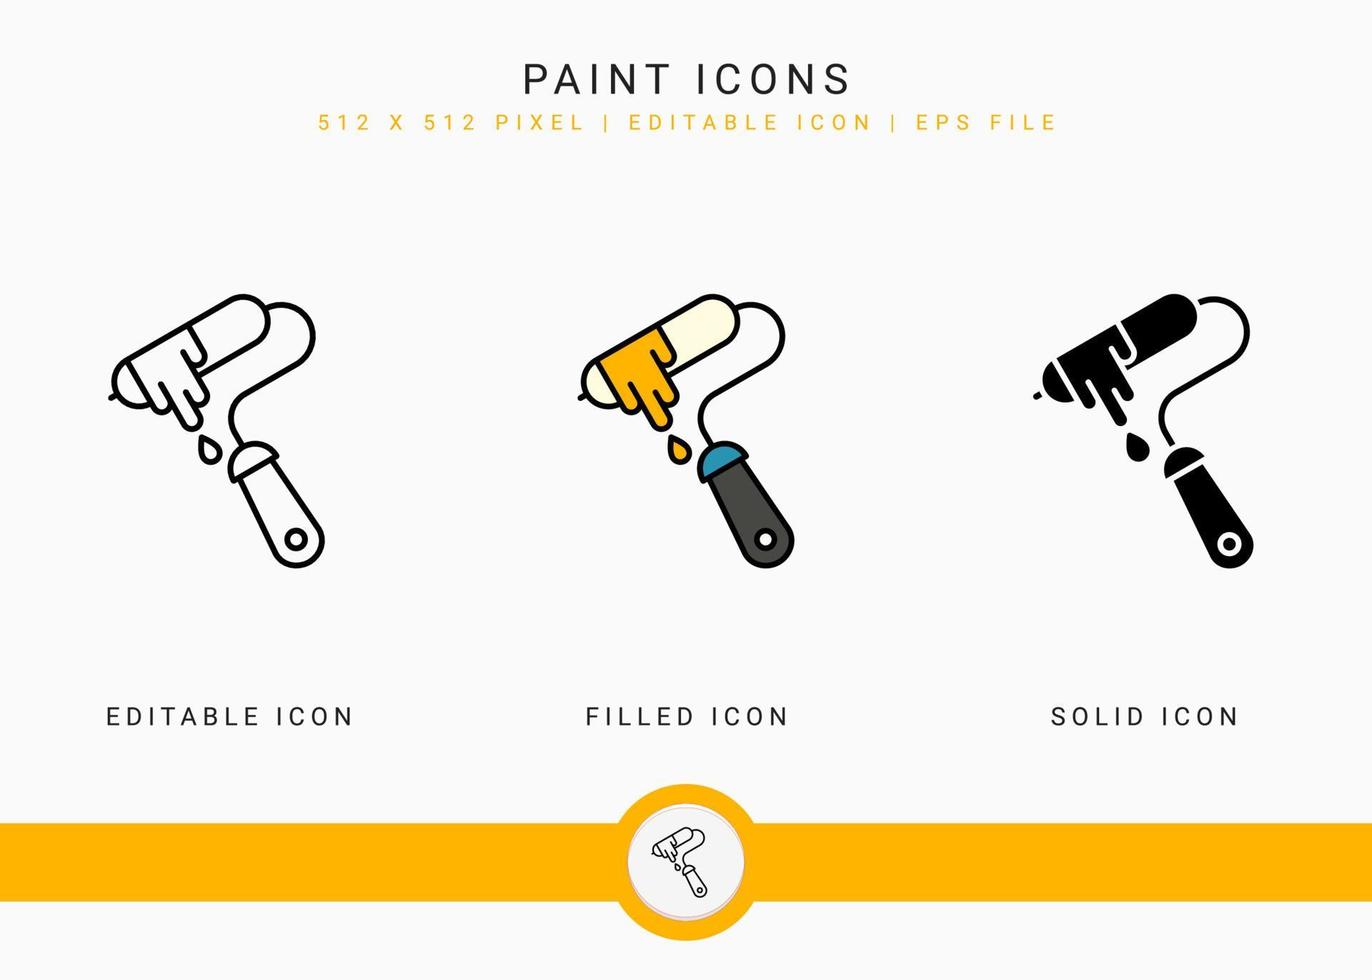 Paint icons set vector illustration with solid icon line style. Carpenter tool building concept. Editable stroke icon on isolated background for web design, user interface, and mobile application